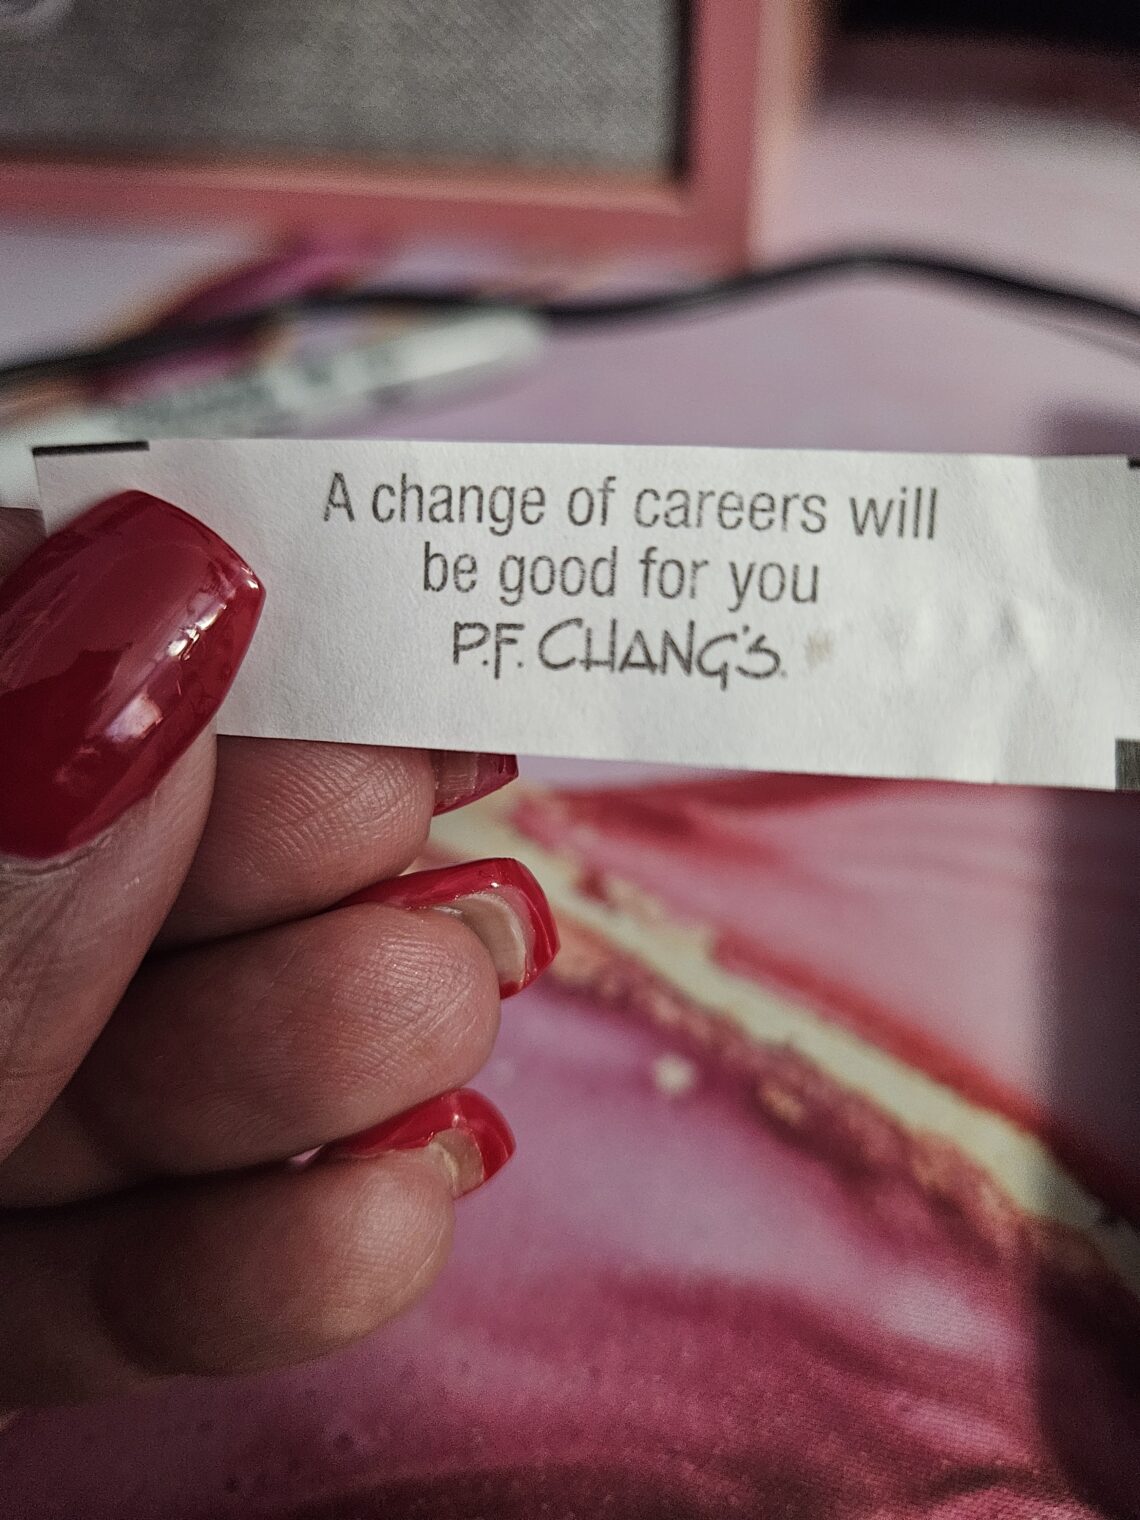 PF Chang fortune cookie stating "A change of careers will be good for you."